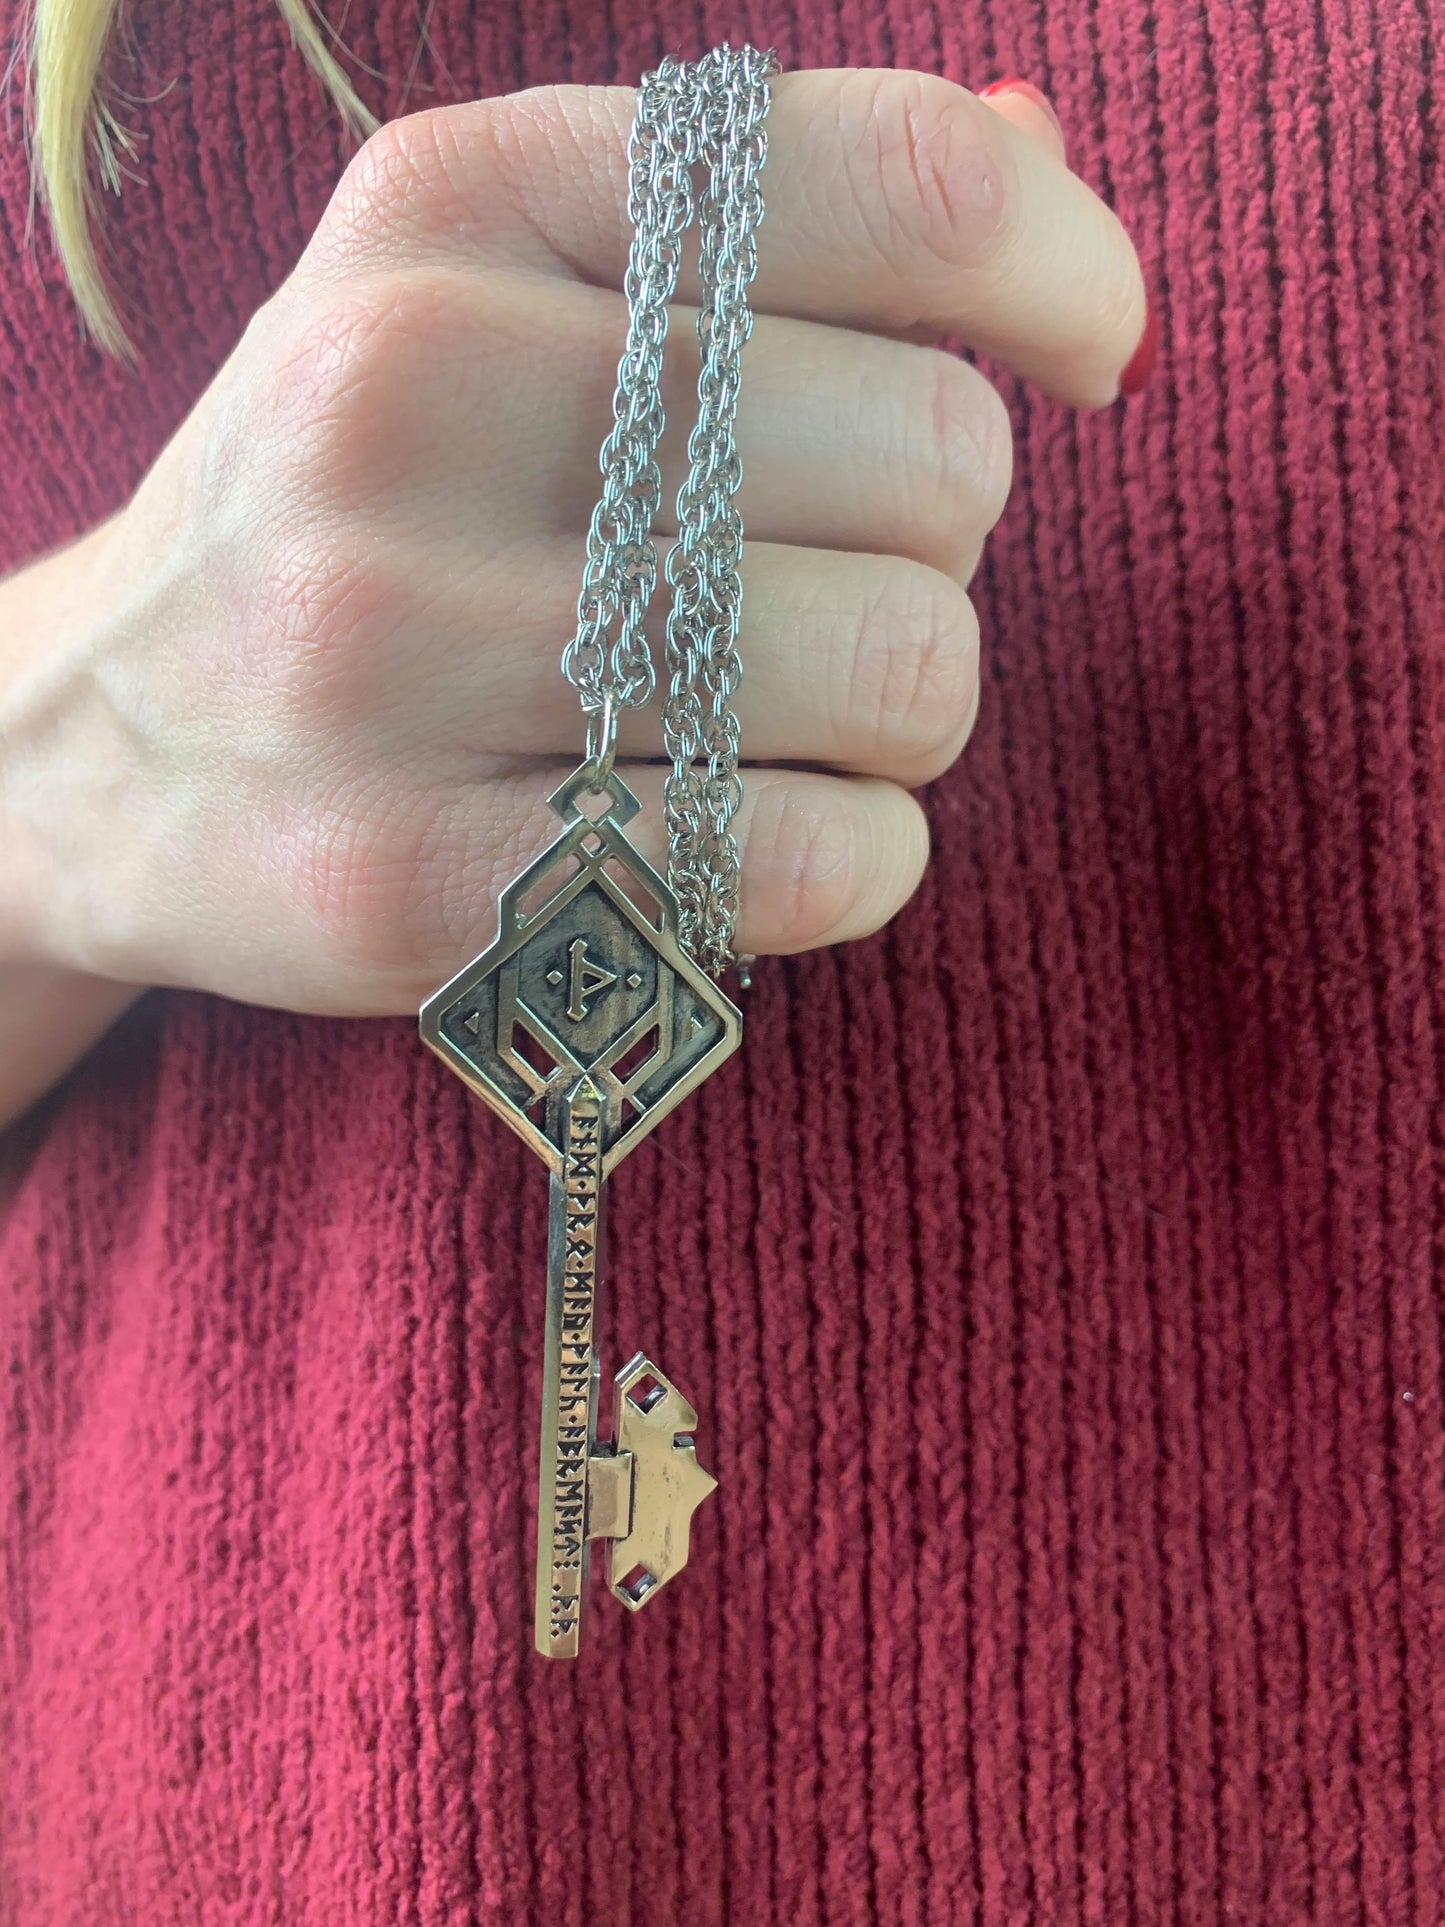 Key to Erebor Bronze Lord of the Rings Necklace